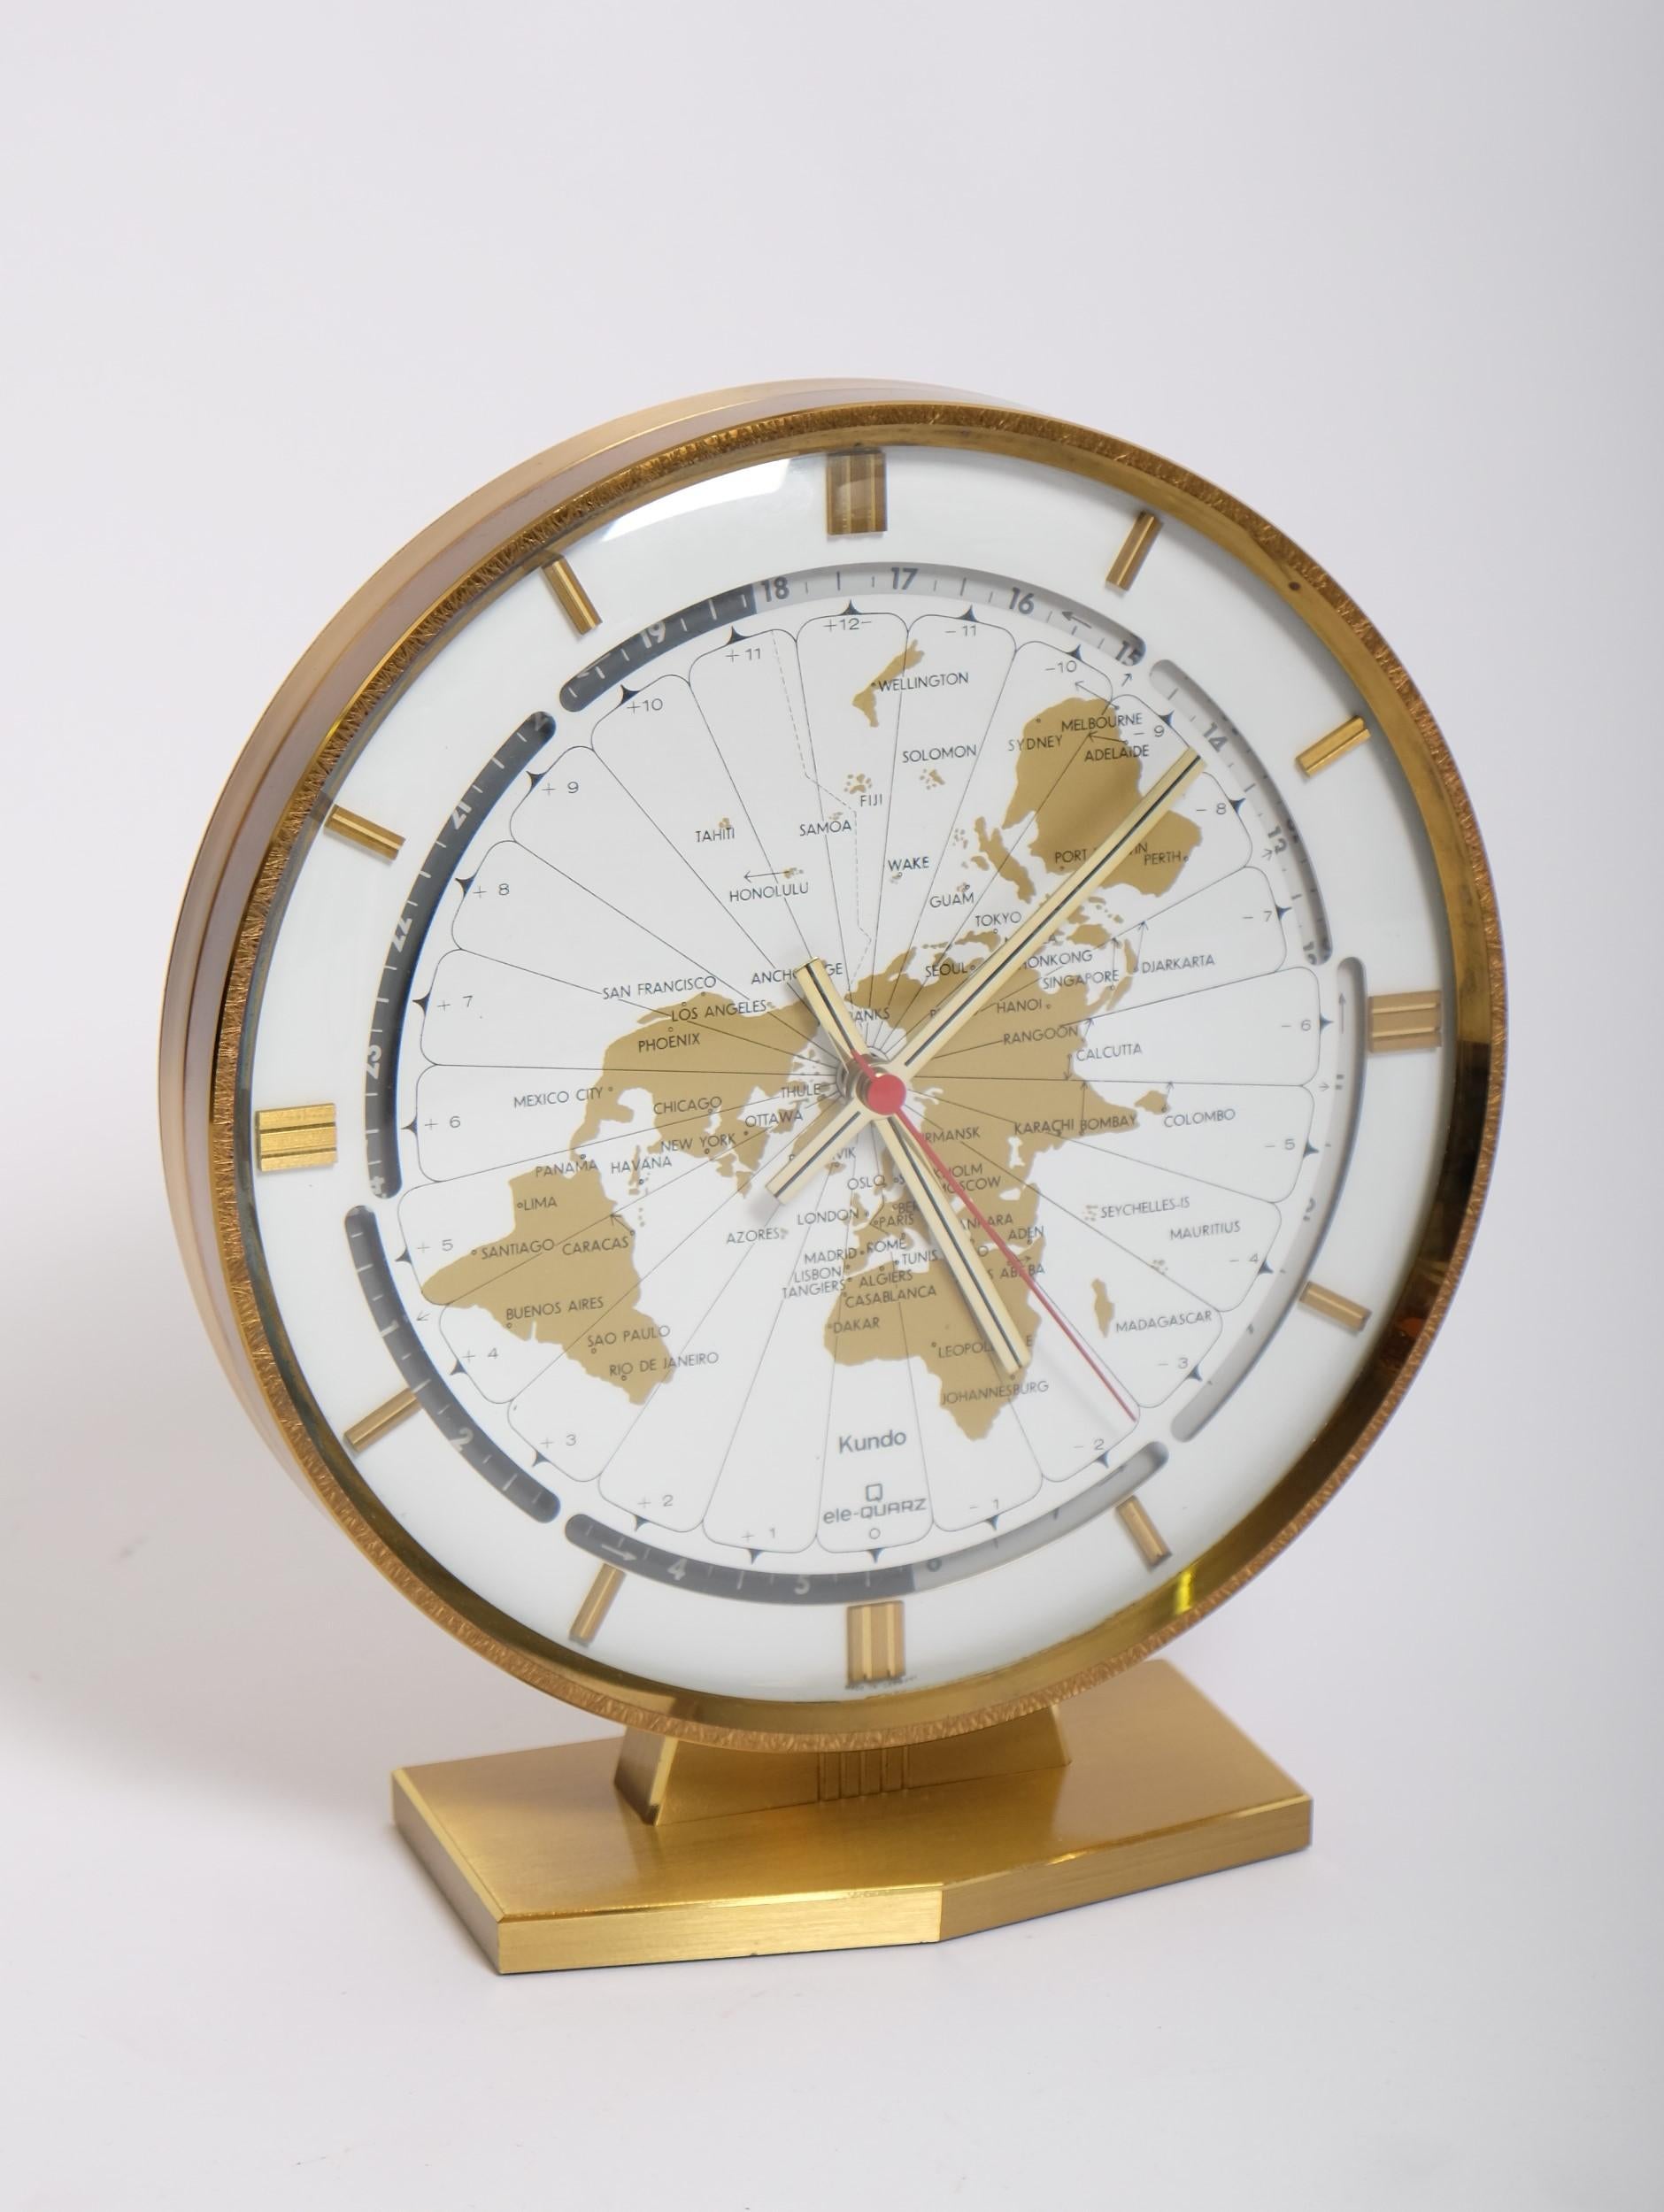 Mid-Century Modern Large Brass Table World Time Zone Clock by Kundo / Kieninger & Obergfell, 1970s For Sale